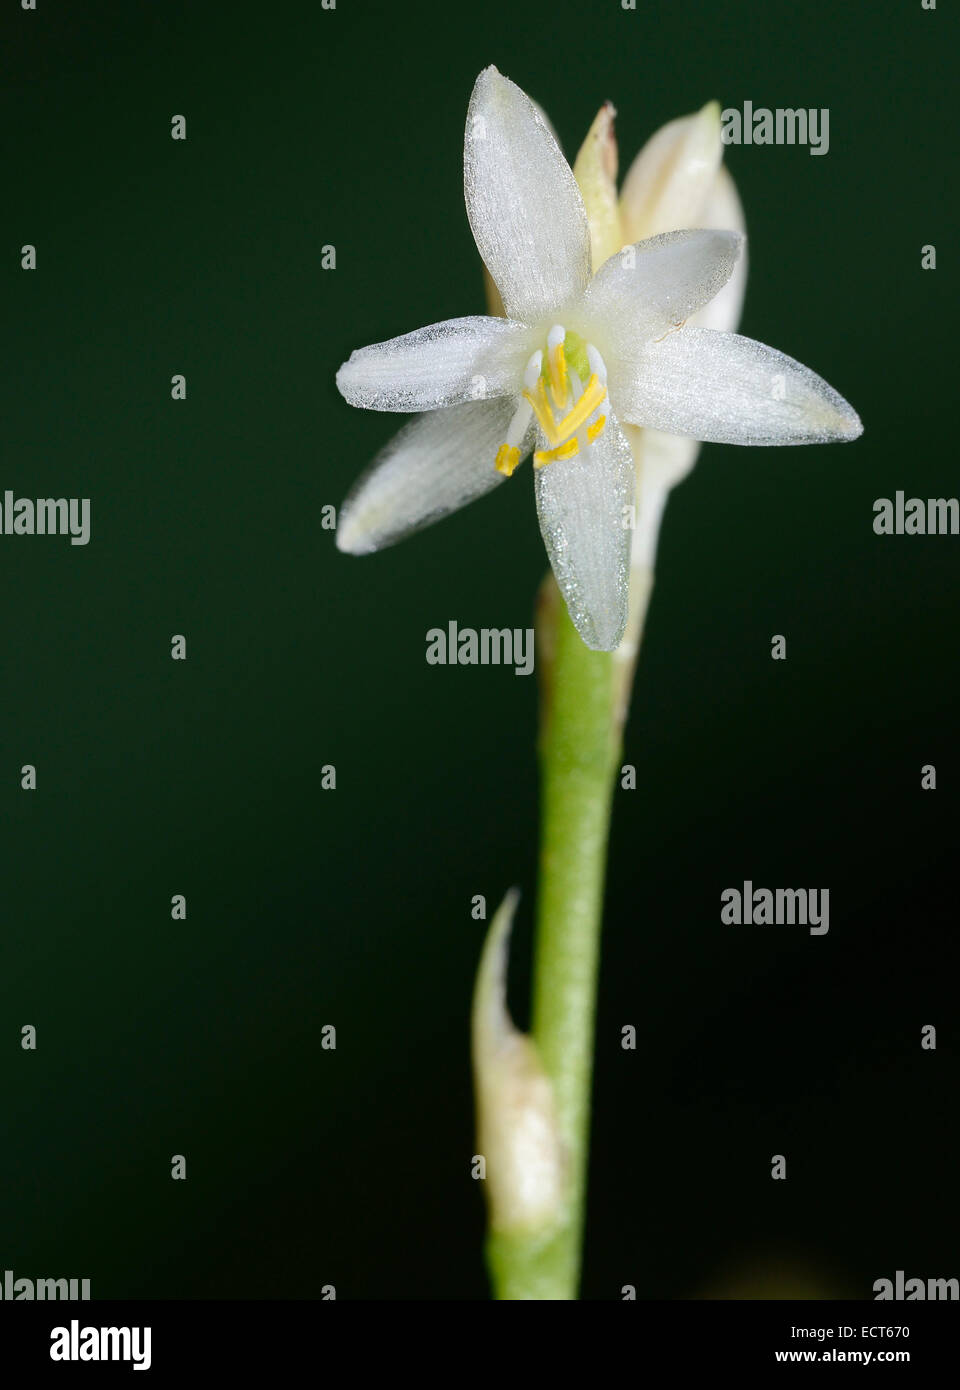 Chlorophytum sparsiflorum Small White Flower from South Africa Stock Photo